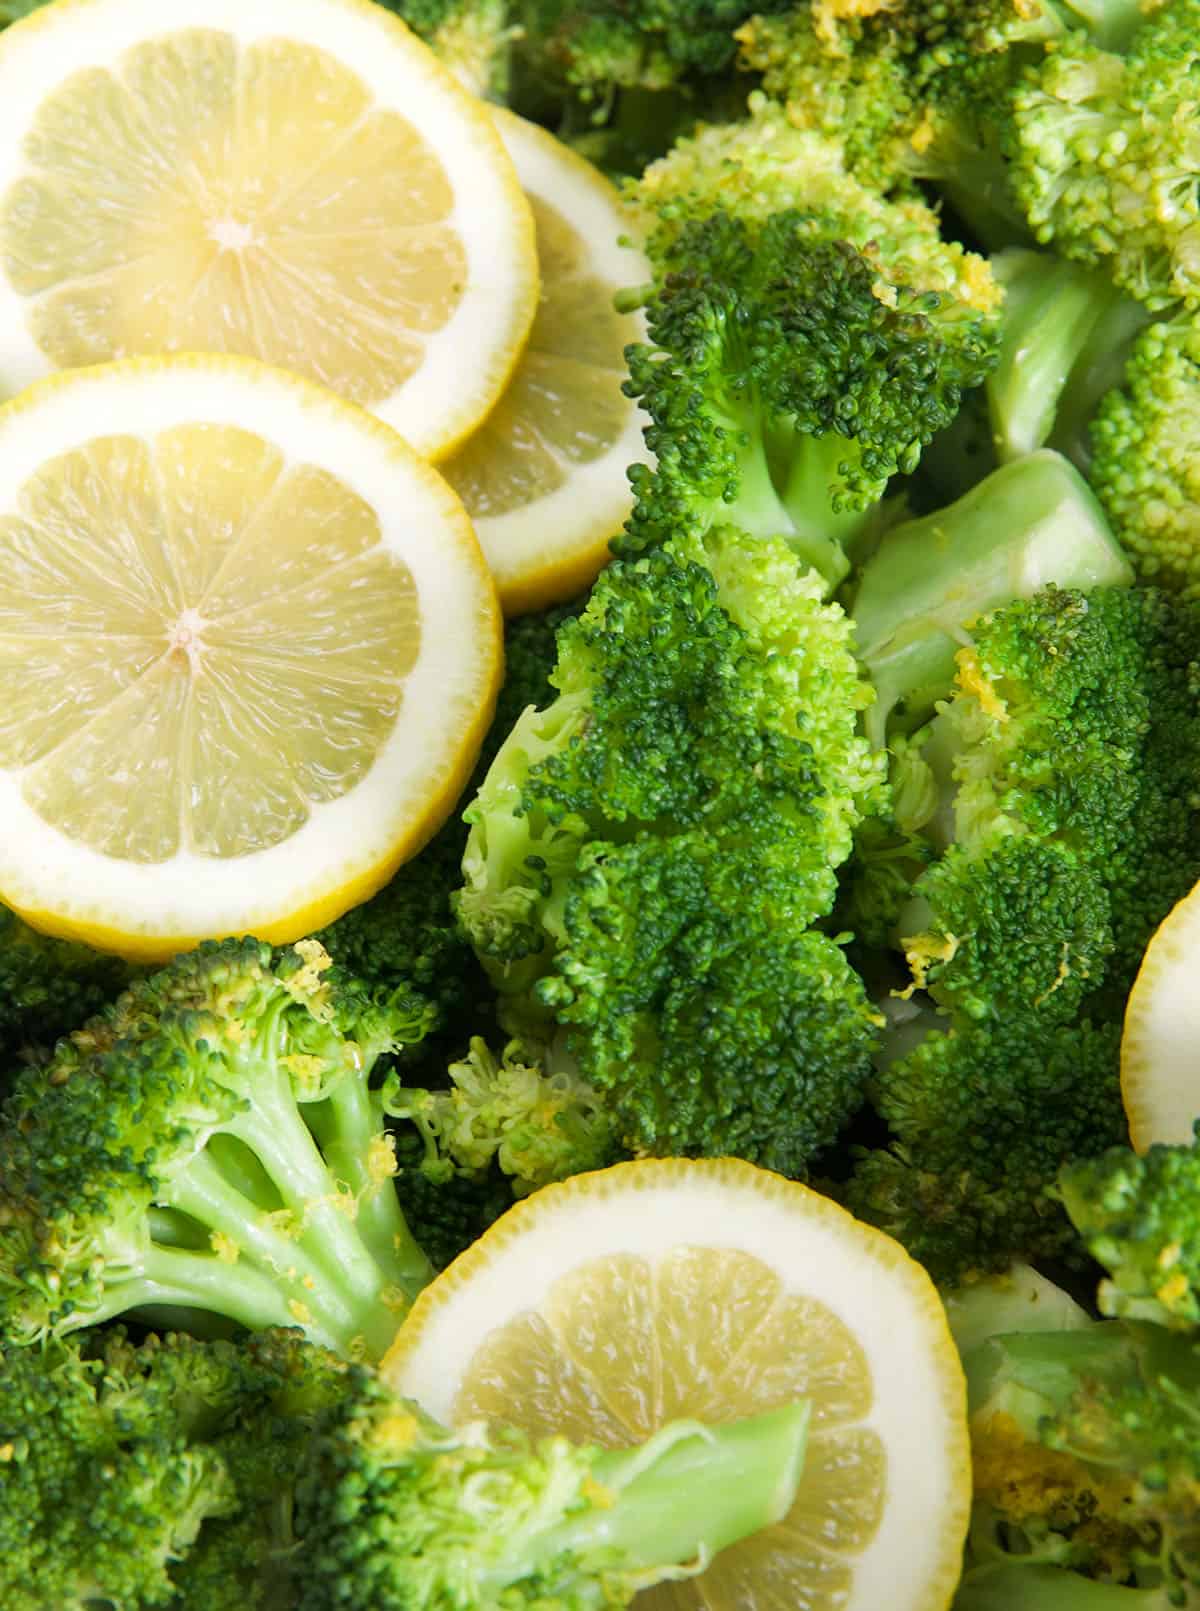 Lemon slices are placed on top of steamed broccoli.